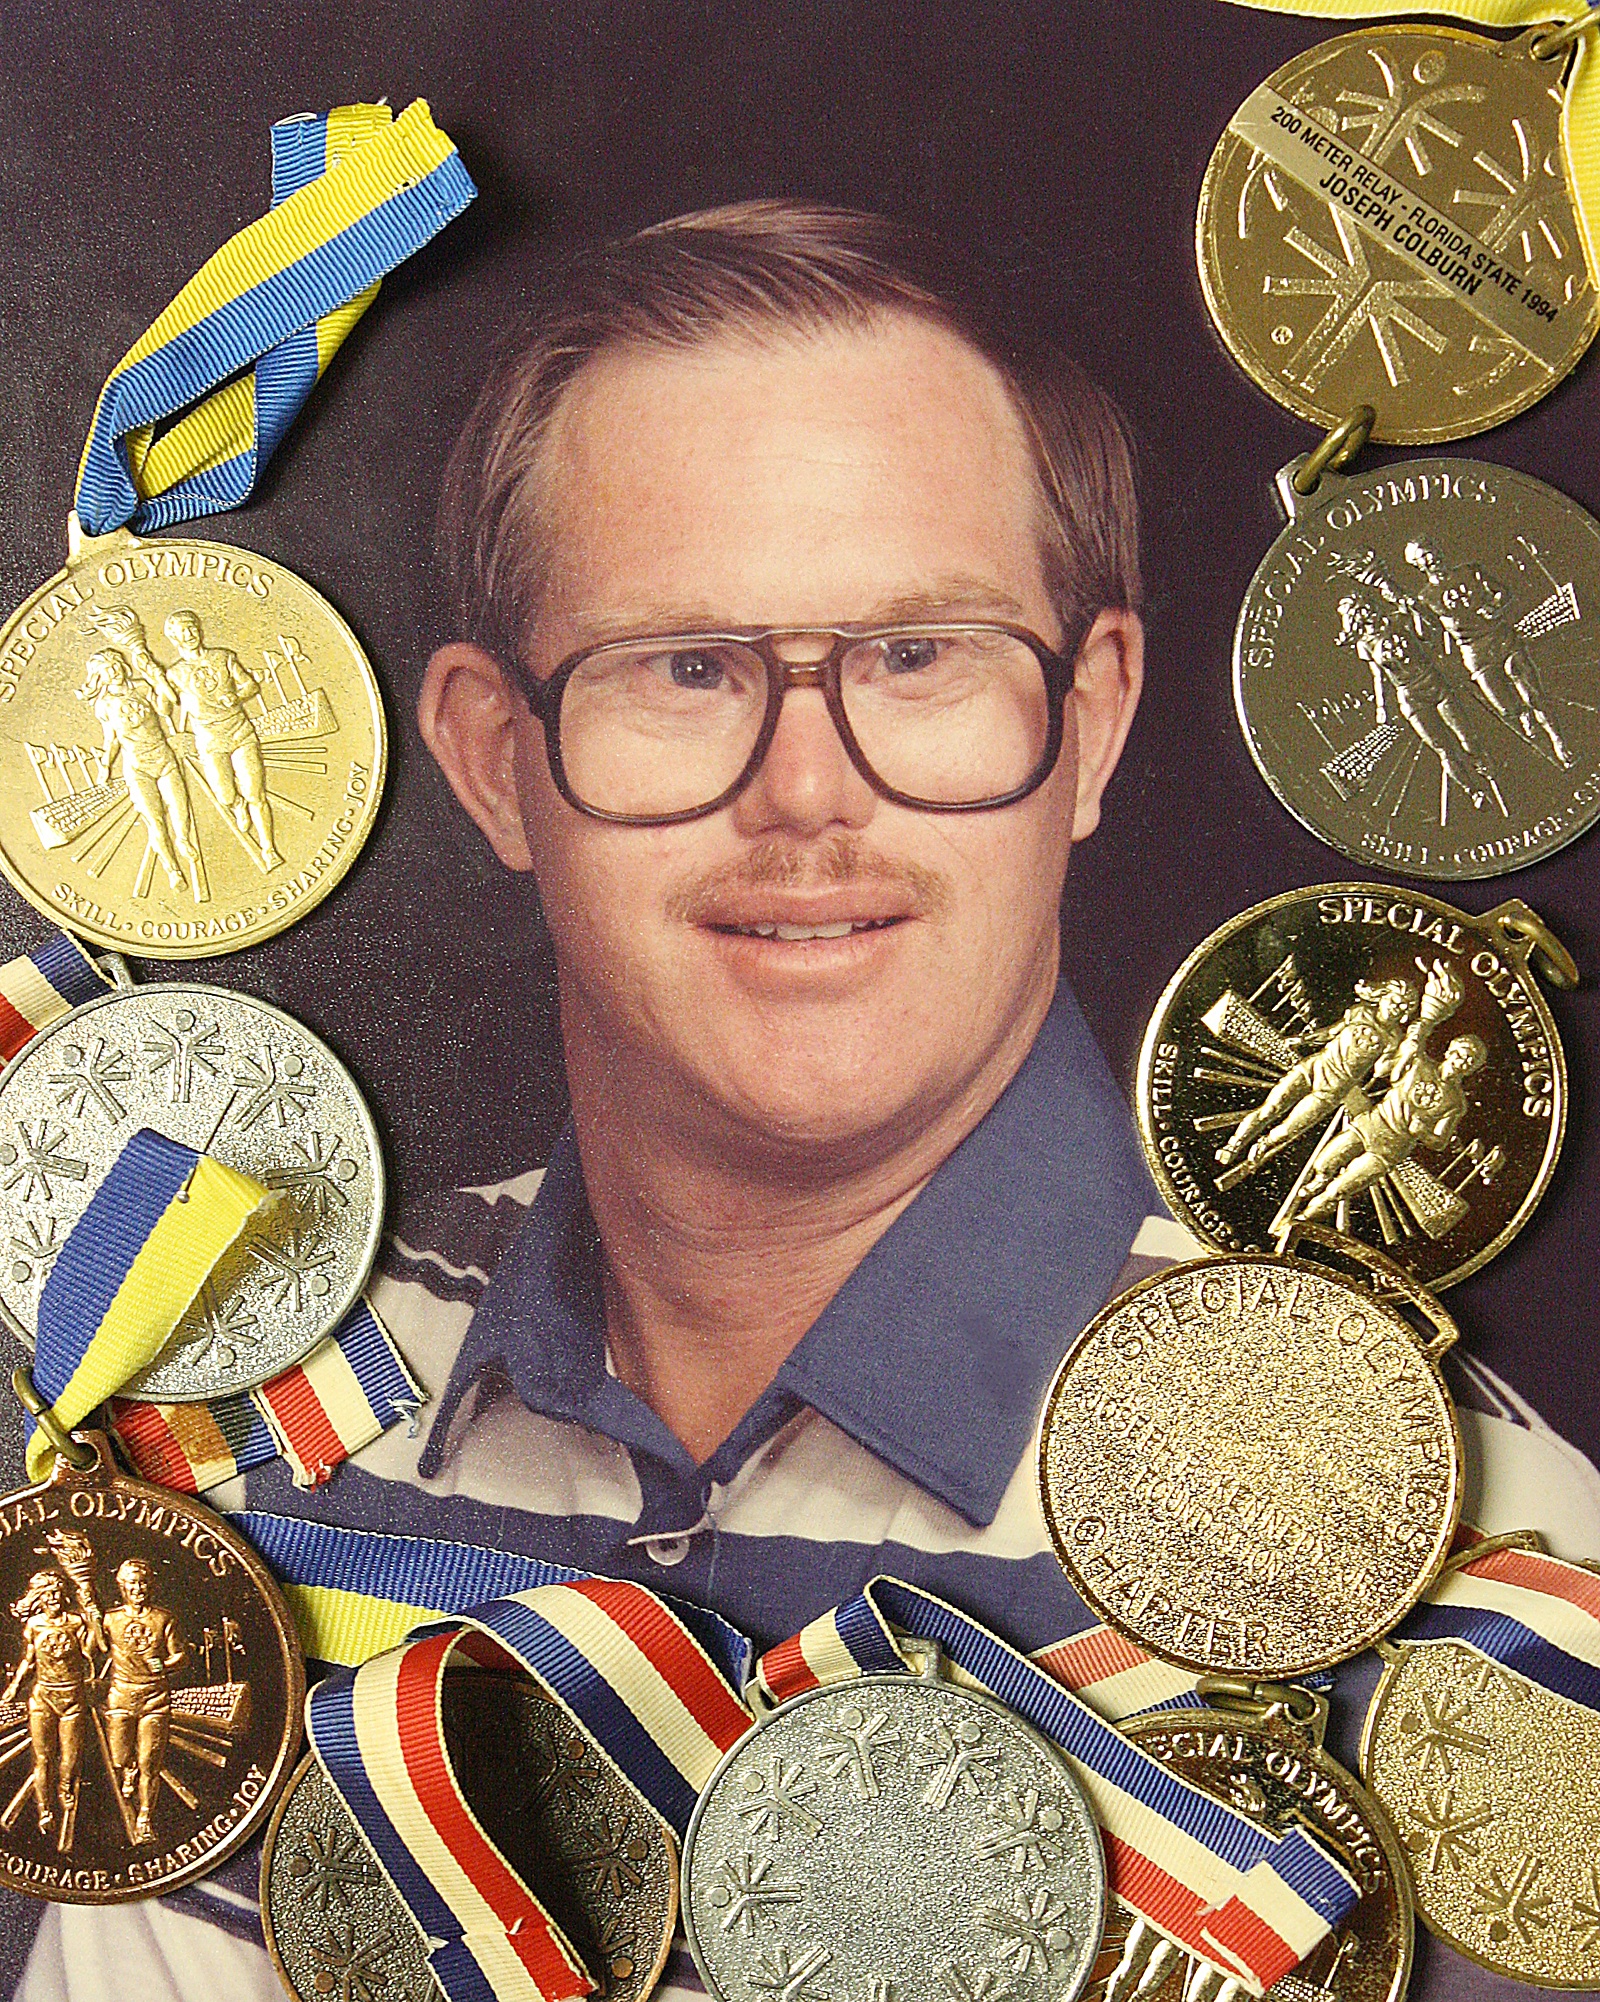 Display of Special Olympic metals with photo of Joey.